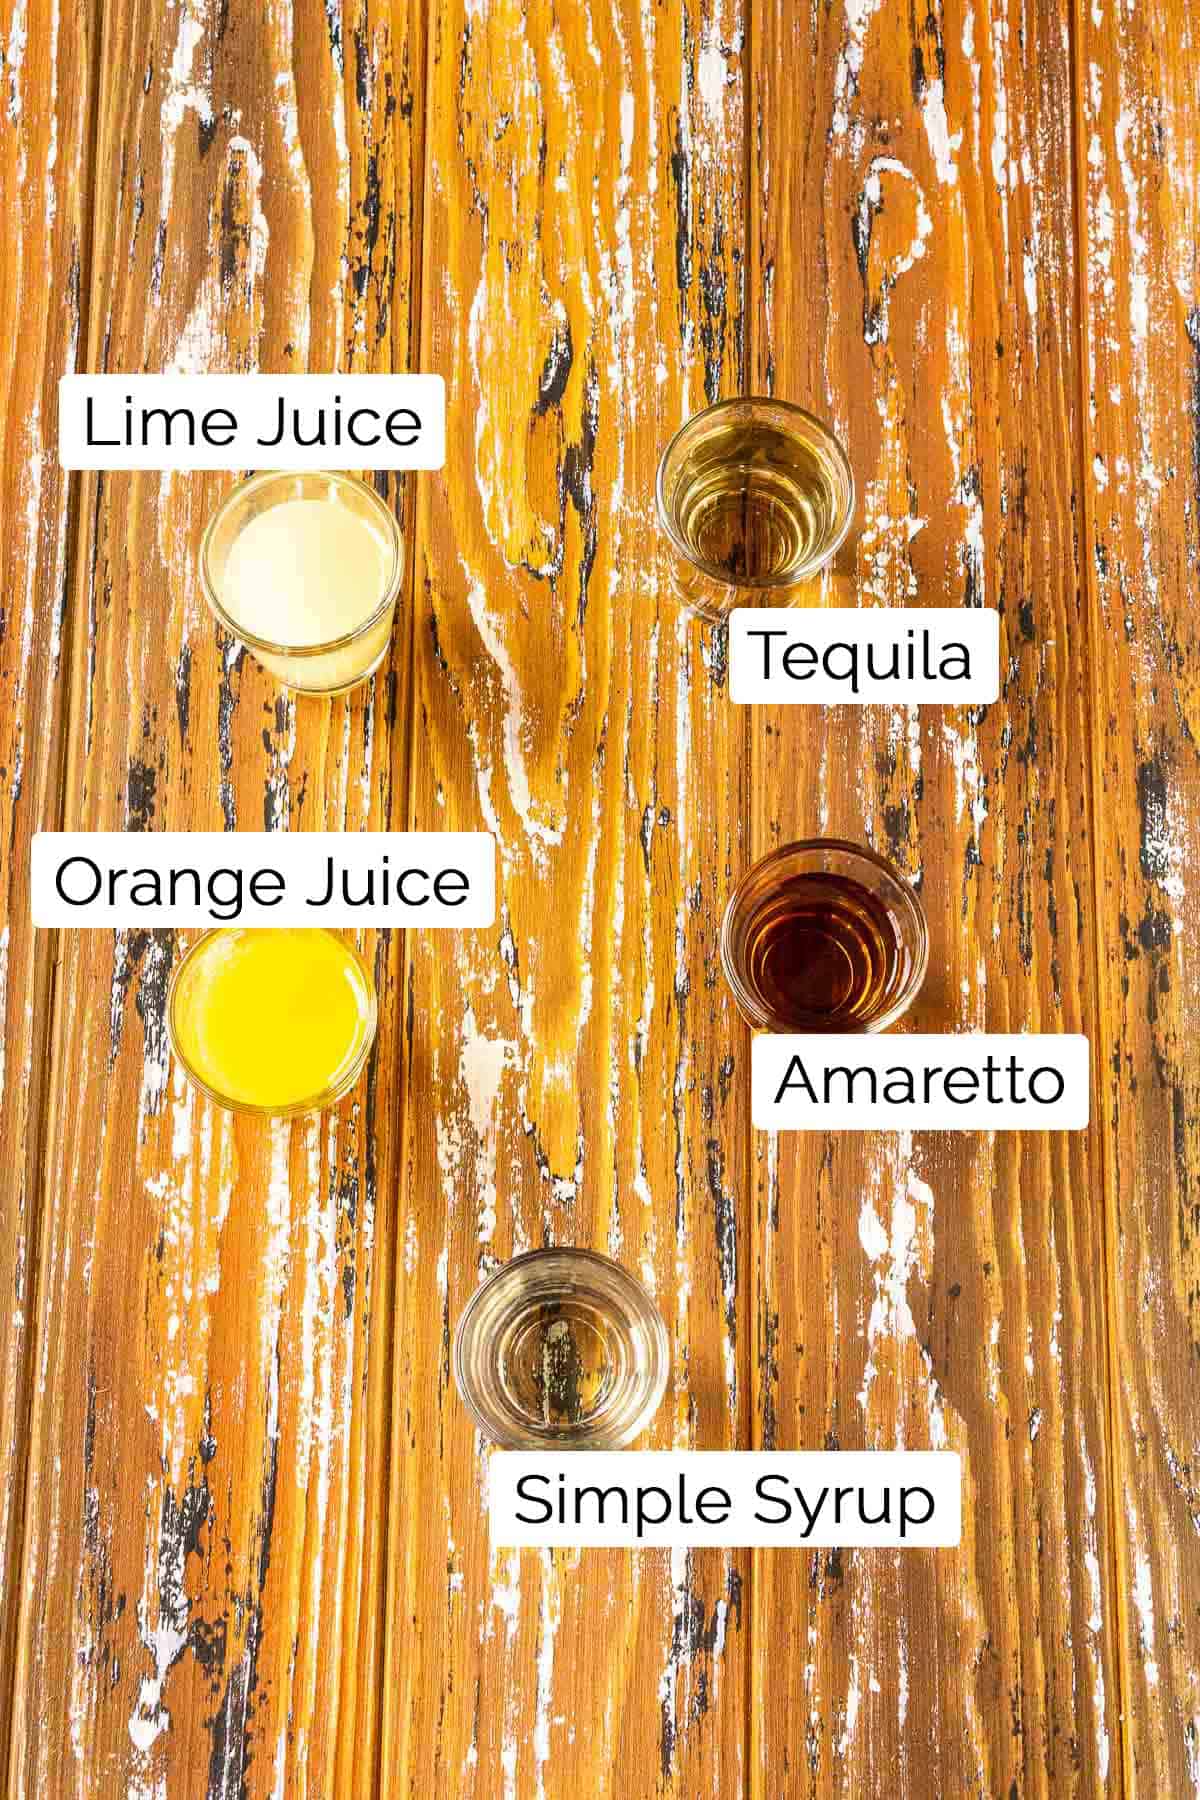 The ingredients with labels on a wooden board with white paint.